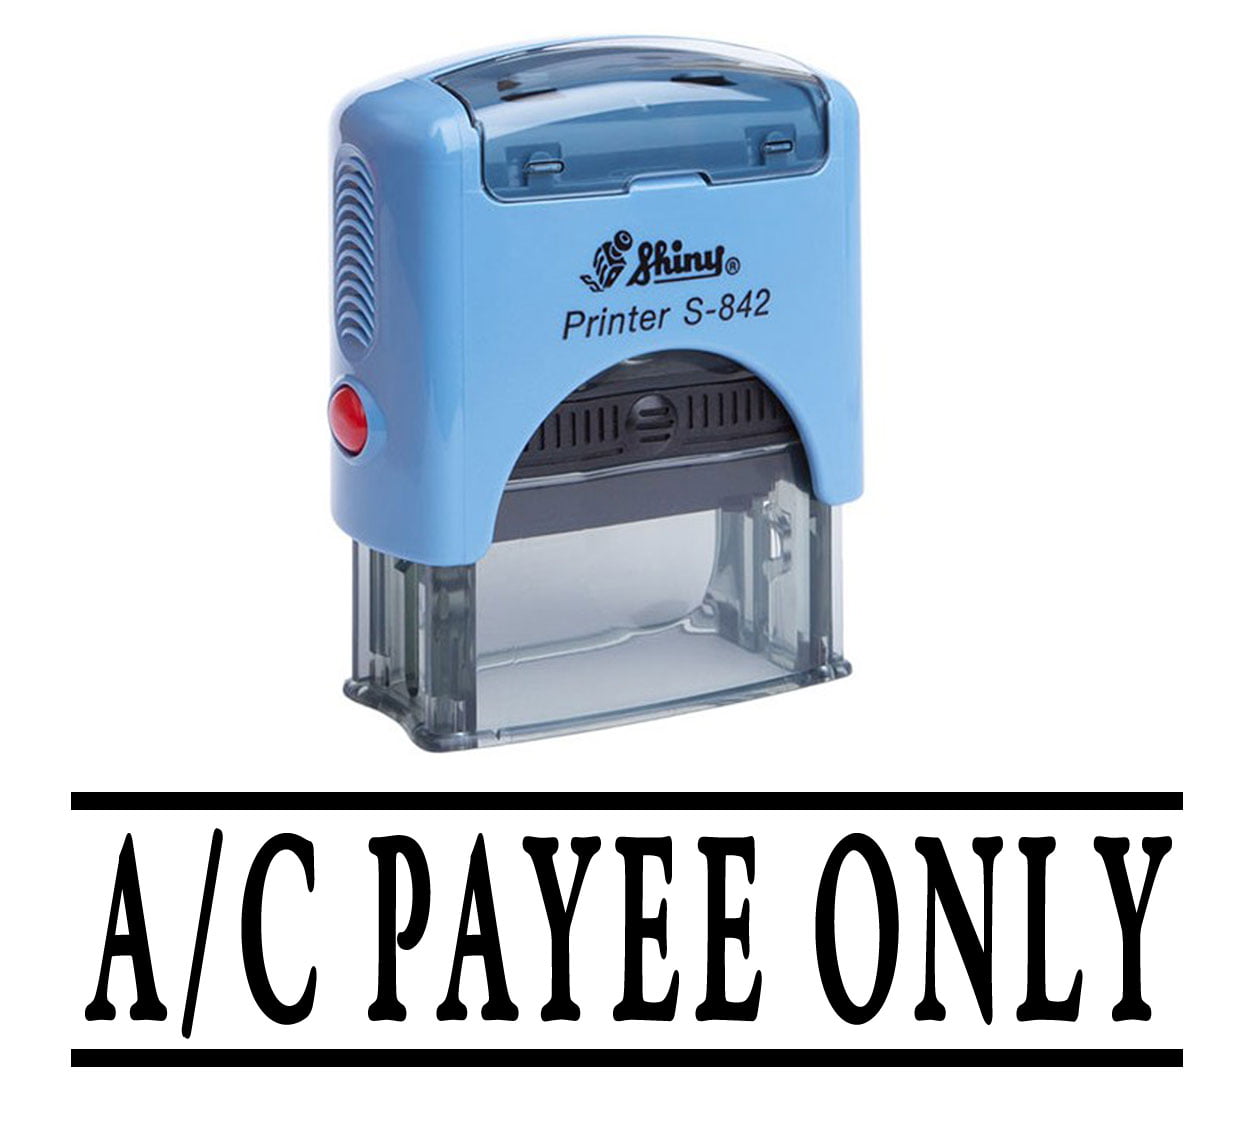 QUALITY A/C PAYEE ONLY RUBBER STAMP/ STAMP PAD SHARP TEXT FOR OFFICE DOCUMENT 